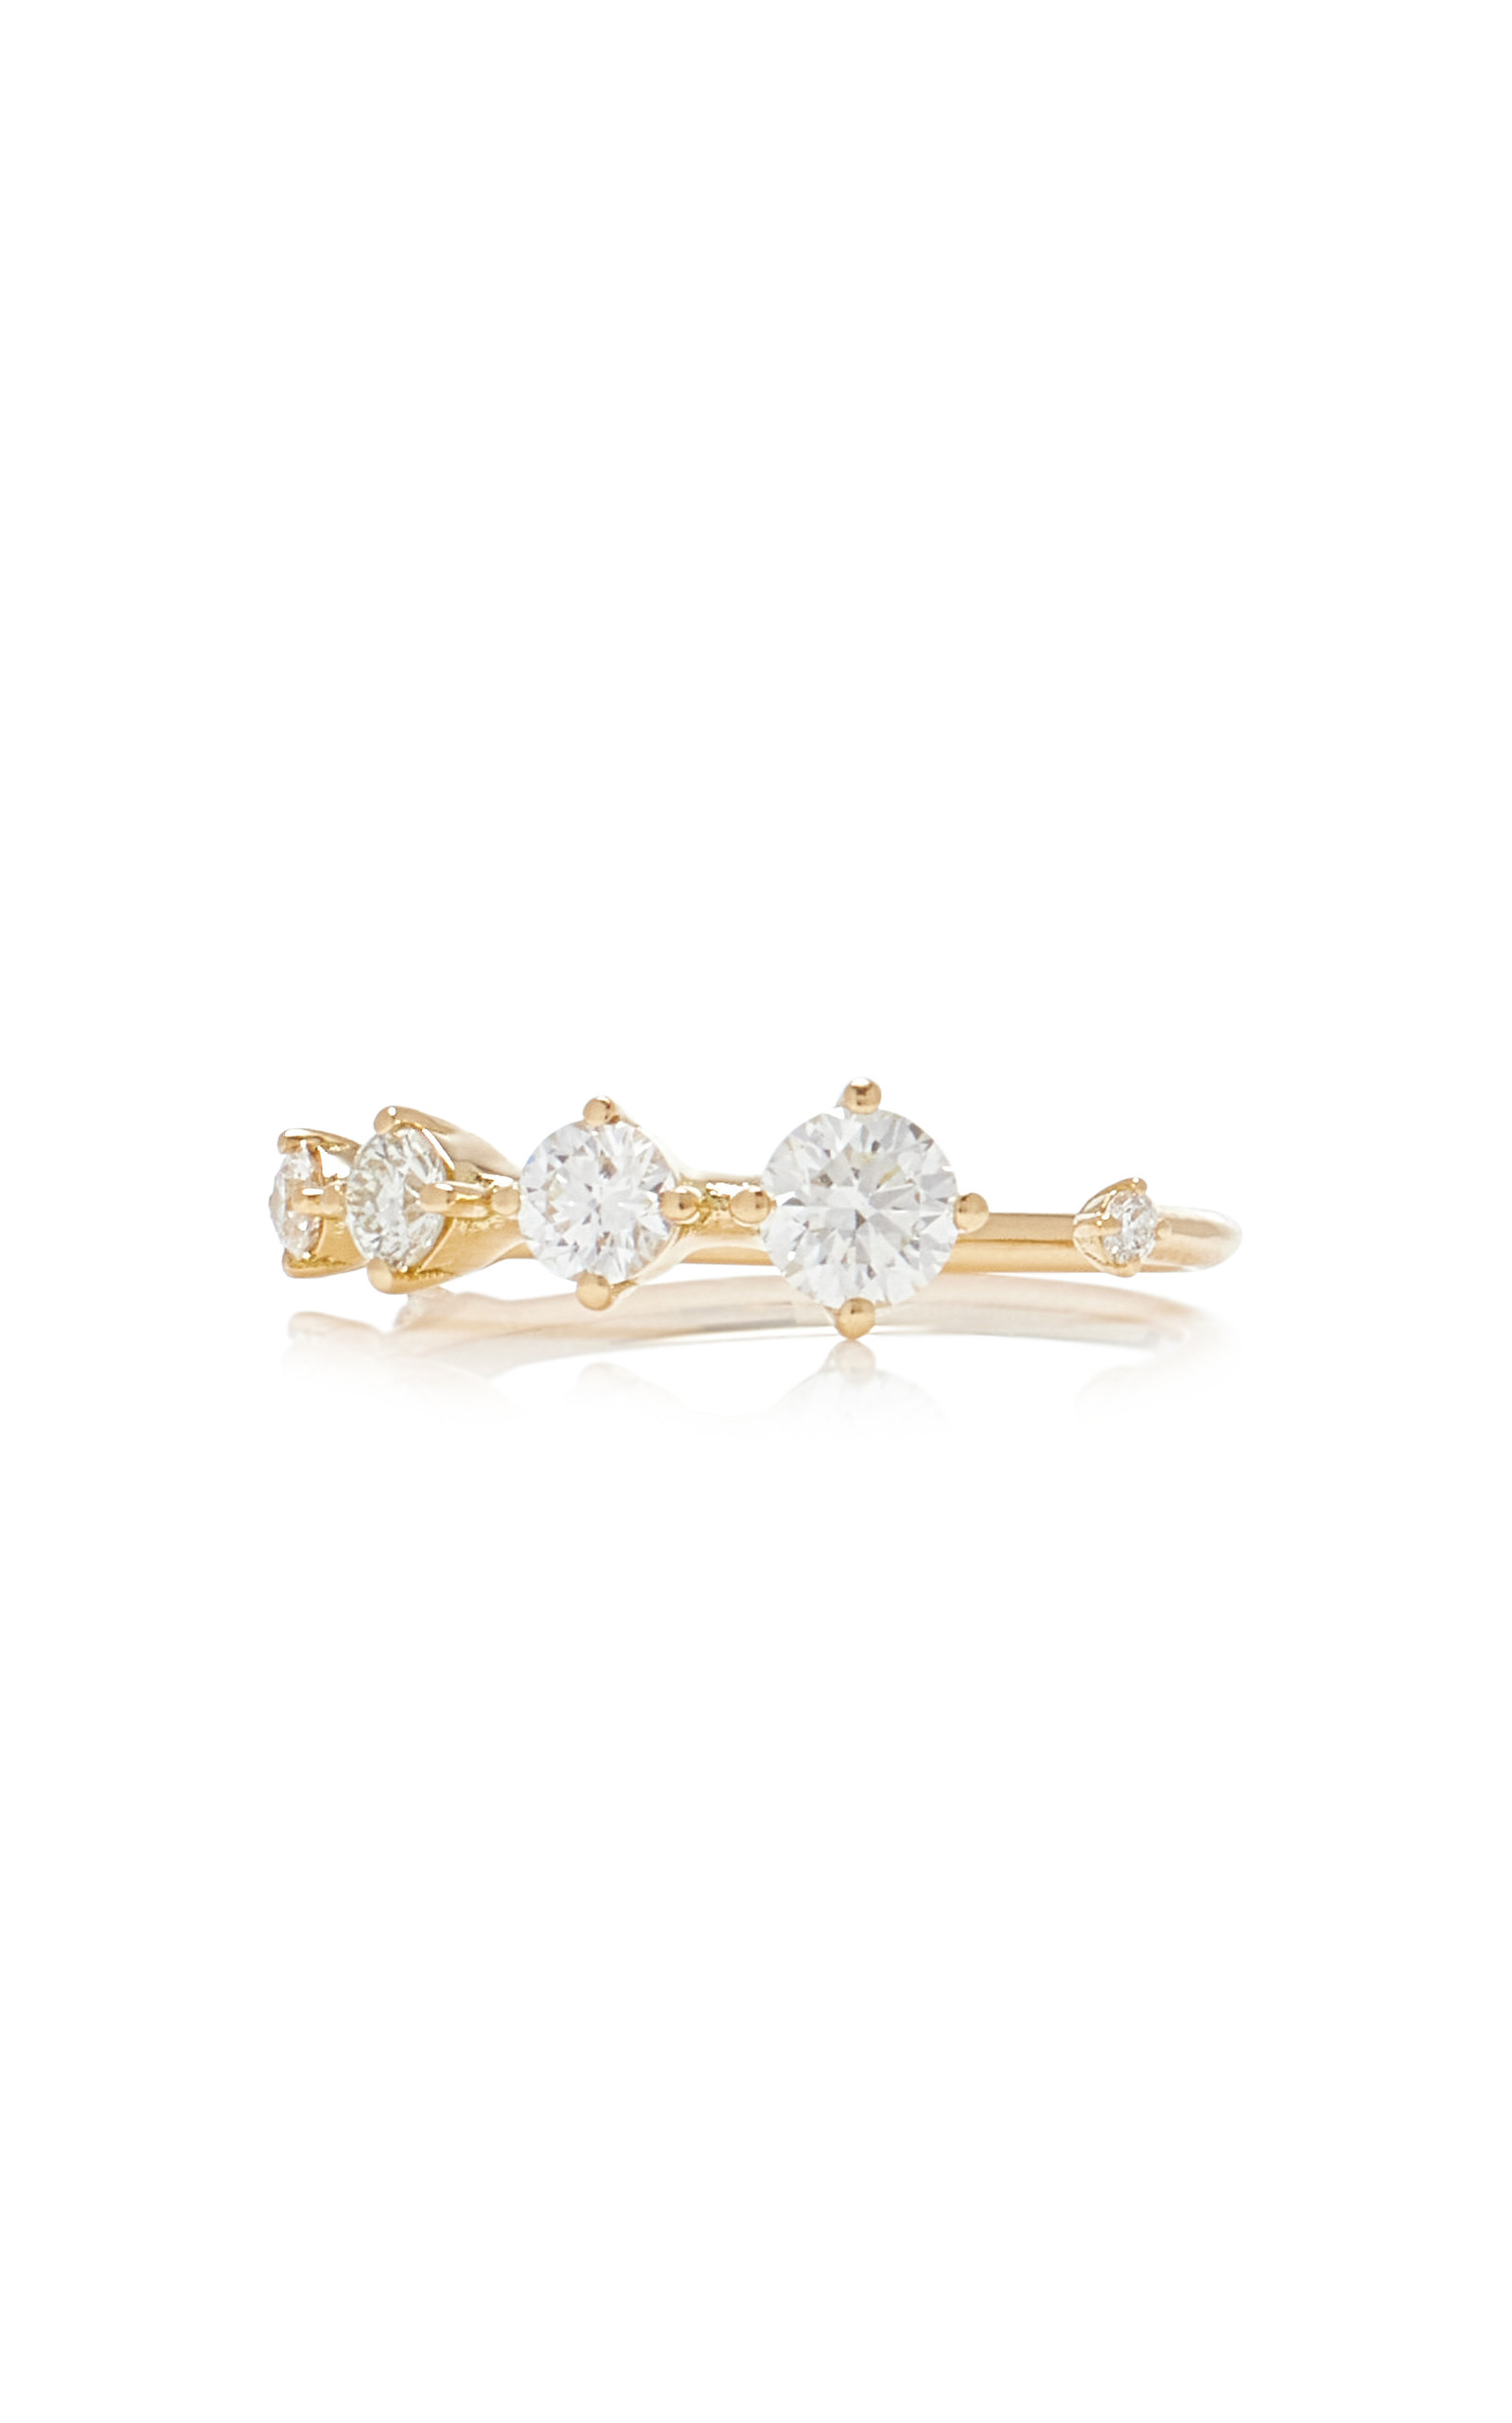 The Sequence 18K Yellow Gold and Diamond Ring